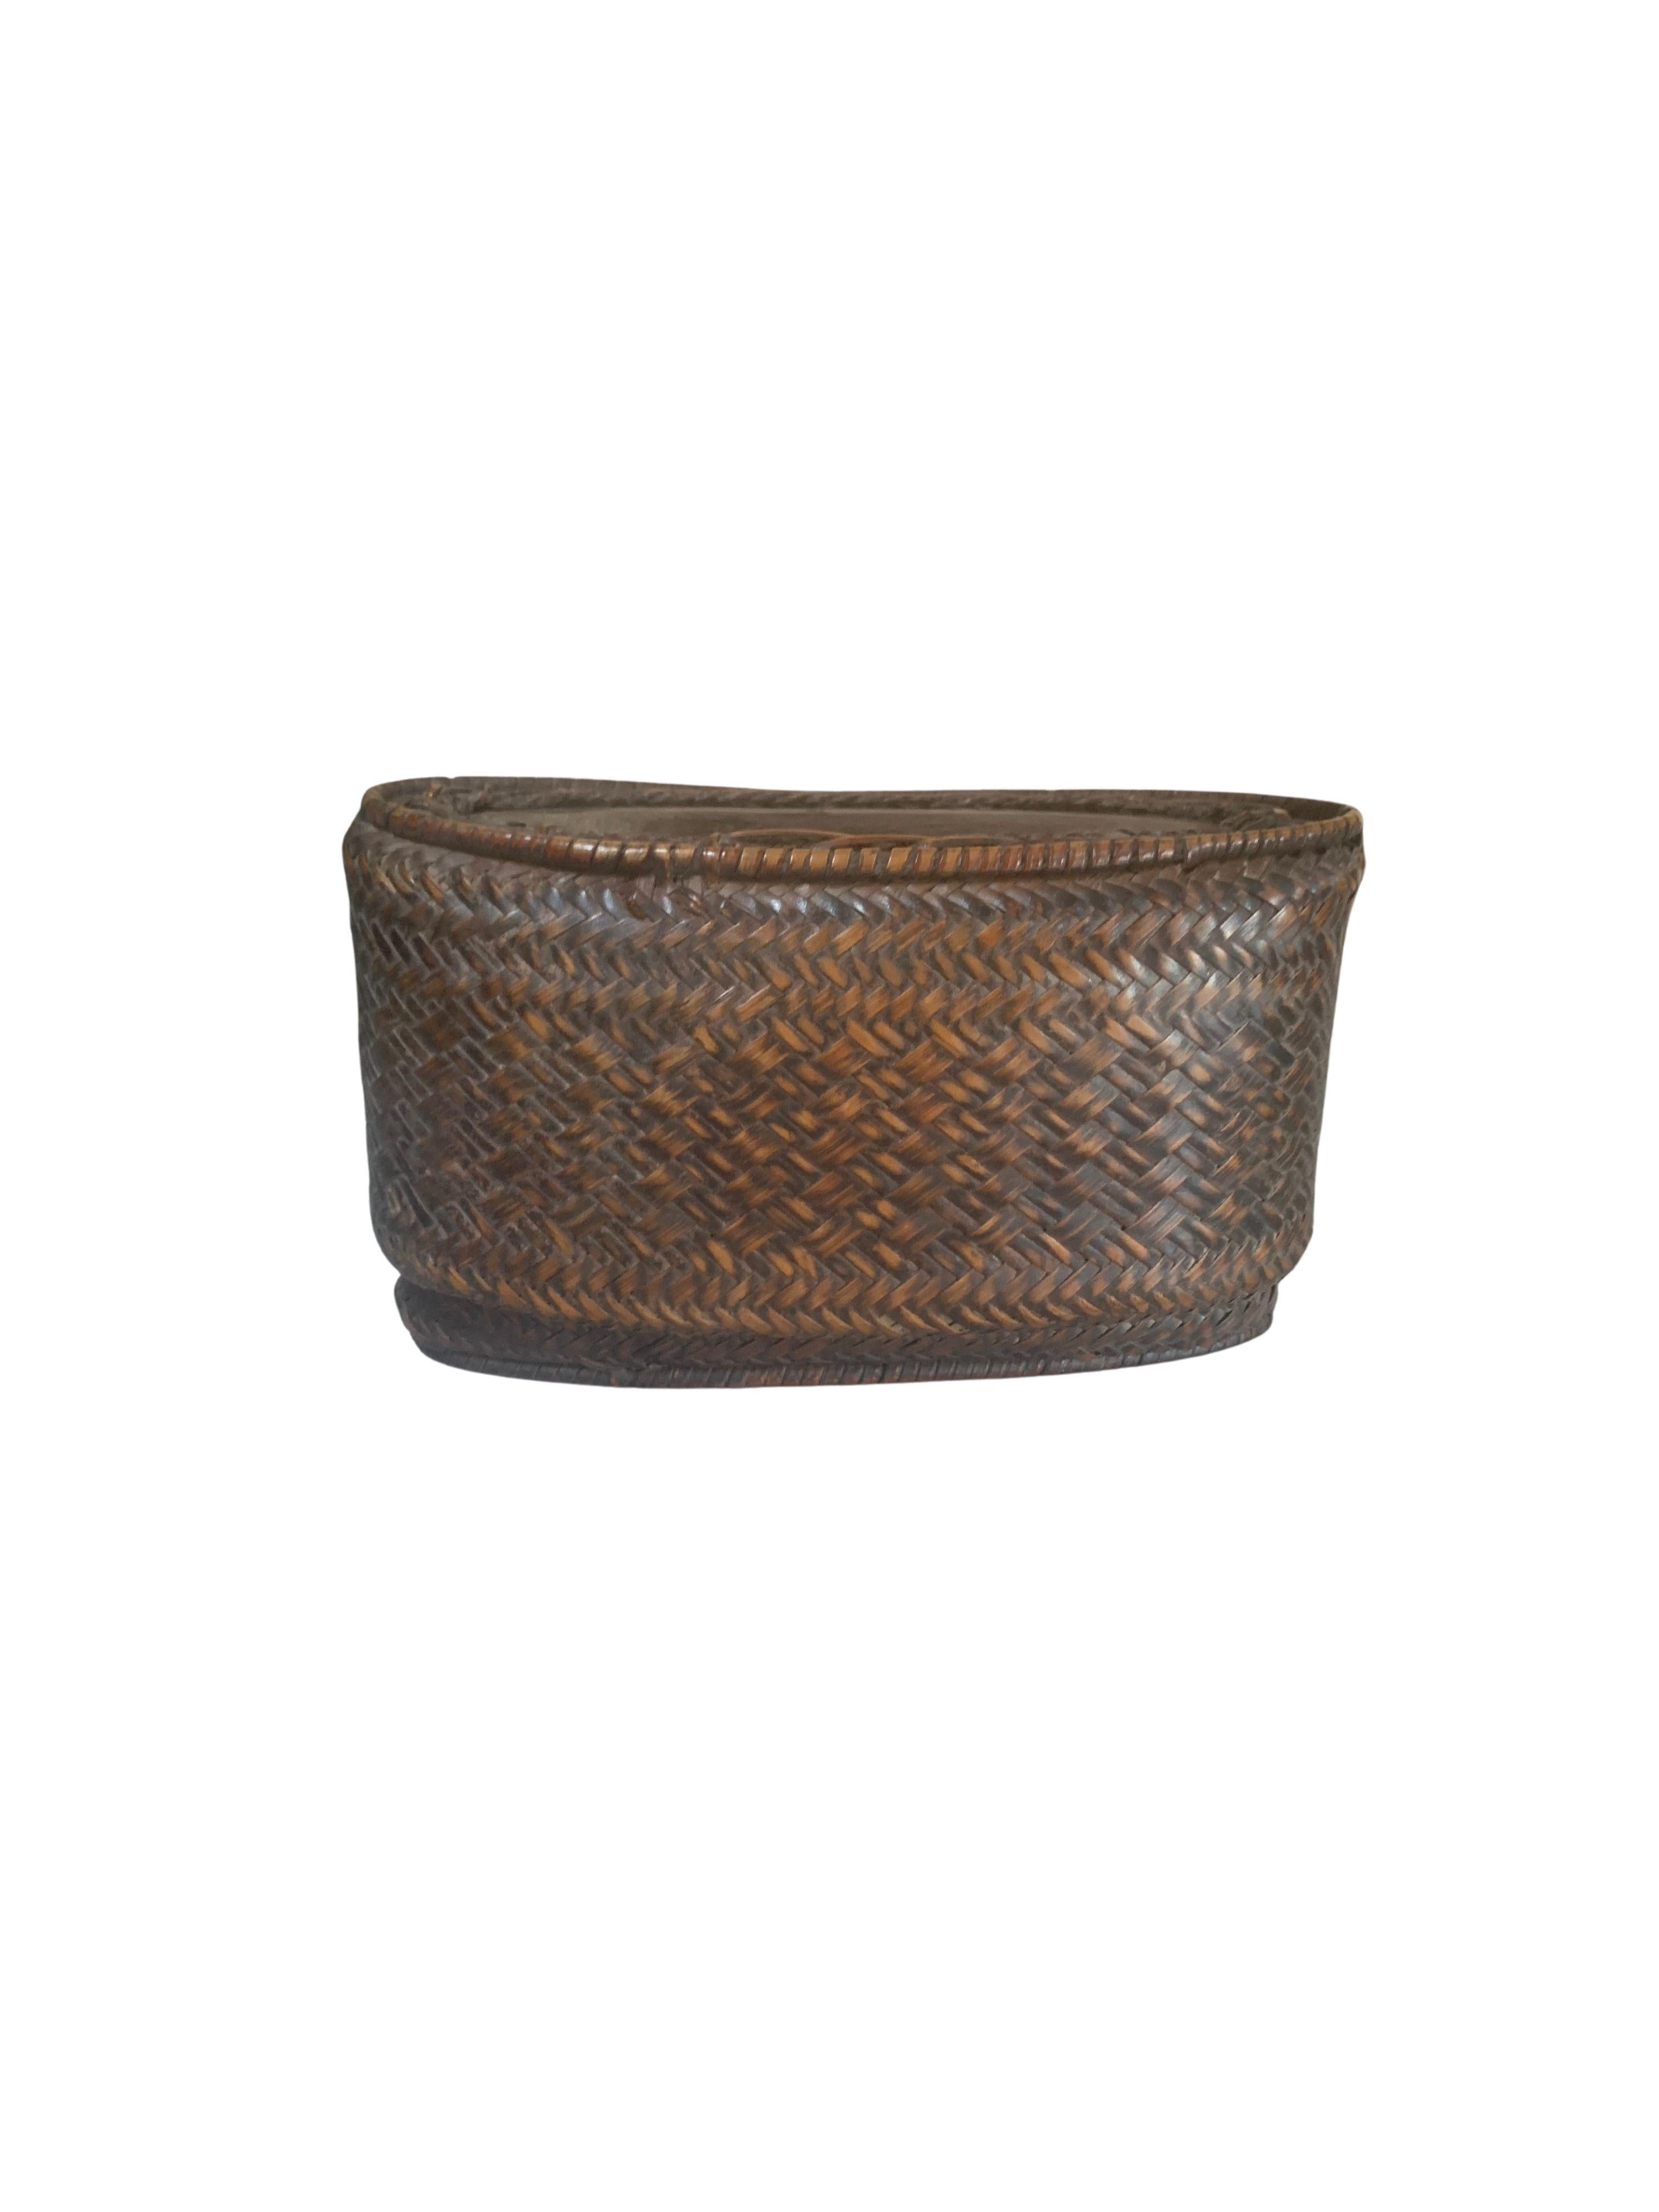 Other Antique Spice Basket from Akha Tribe of Northern Thailand c. 1920 For Sale